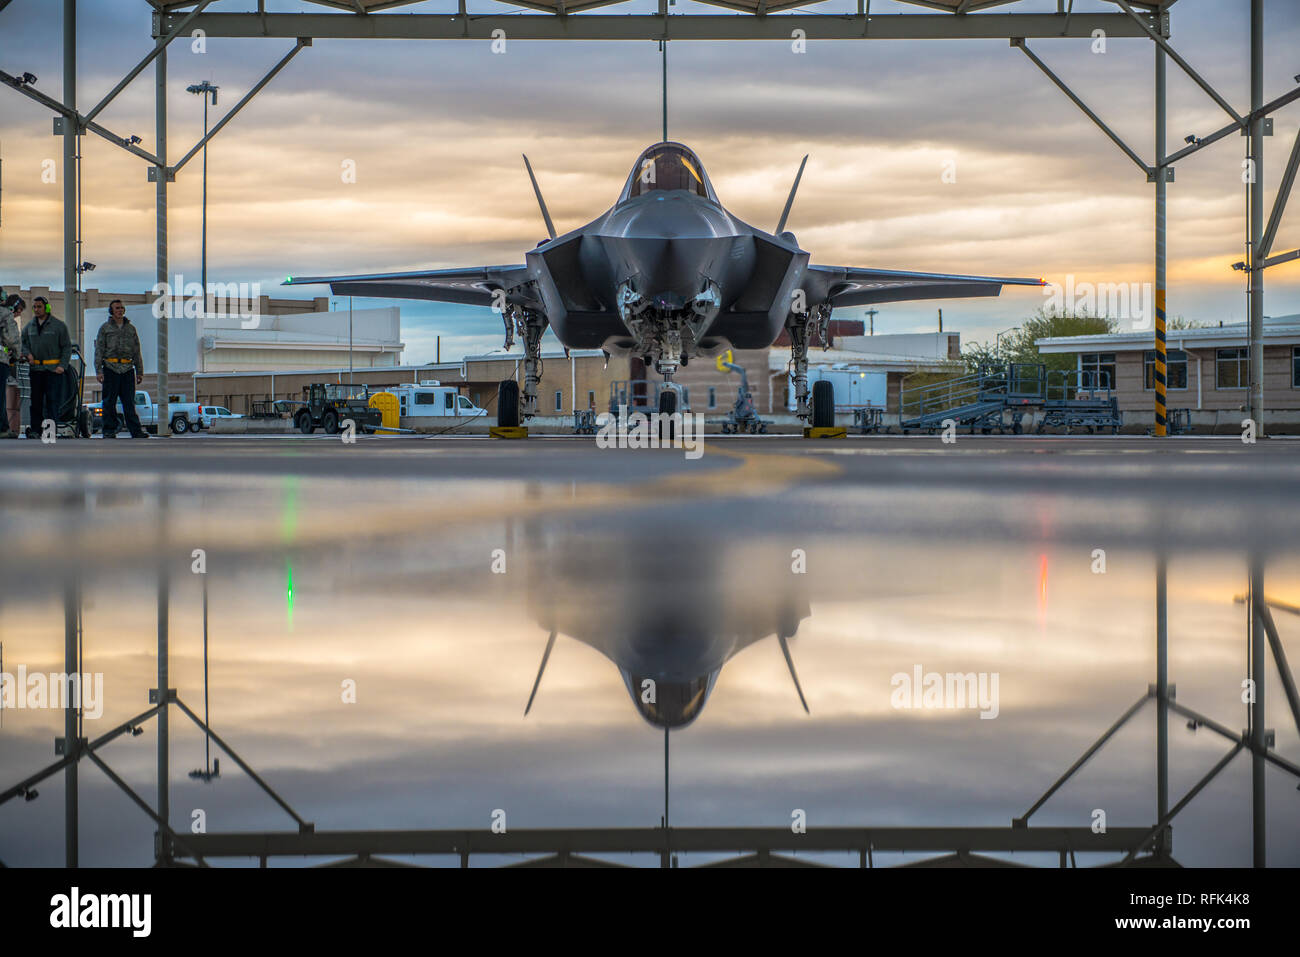 A pilot assigned to the 61st Fighter Squadron and 61st Aircraft Maintenance Unit crew chiefs prepare an F-35A Lightning II for taxi, Jan. 15, 2019 at Luke Air Force Base, Ariz. Crew chiefs work with pilots to ensure the F-35 takes-off and lands safely. (U.S Air Force photo by Airman 1st Class Jacob Wongwai) Stock Photo